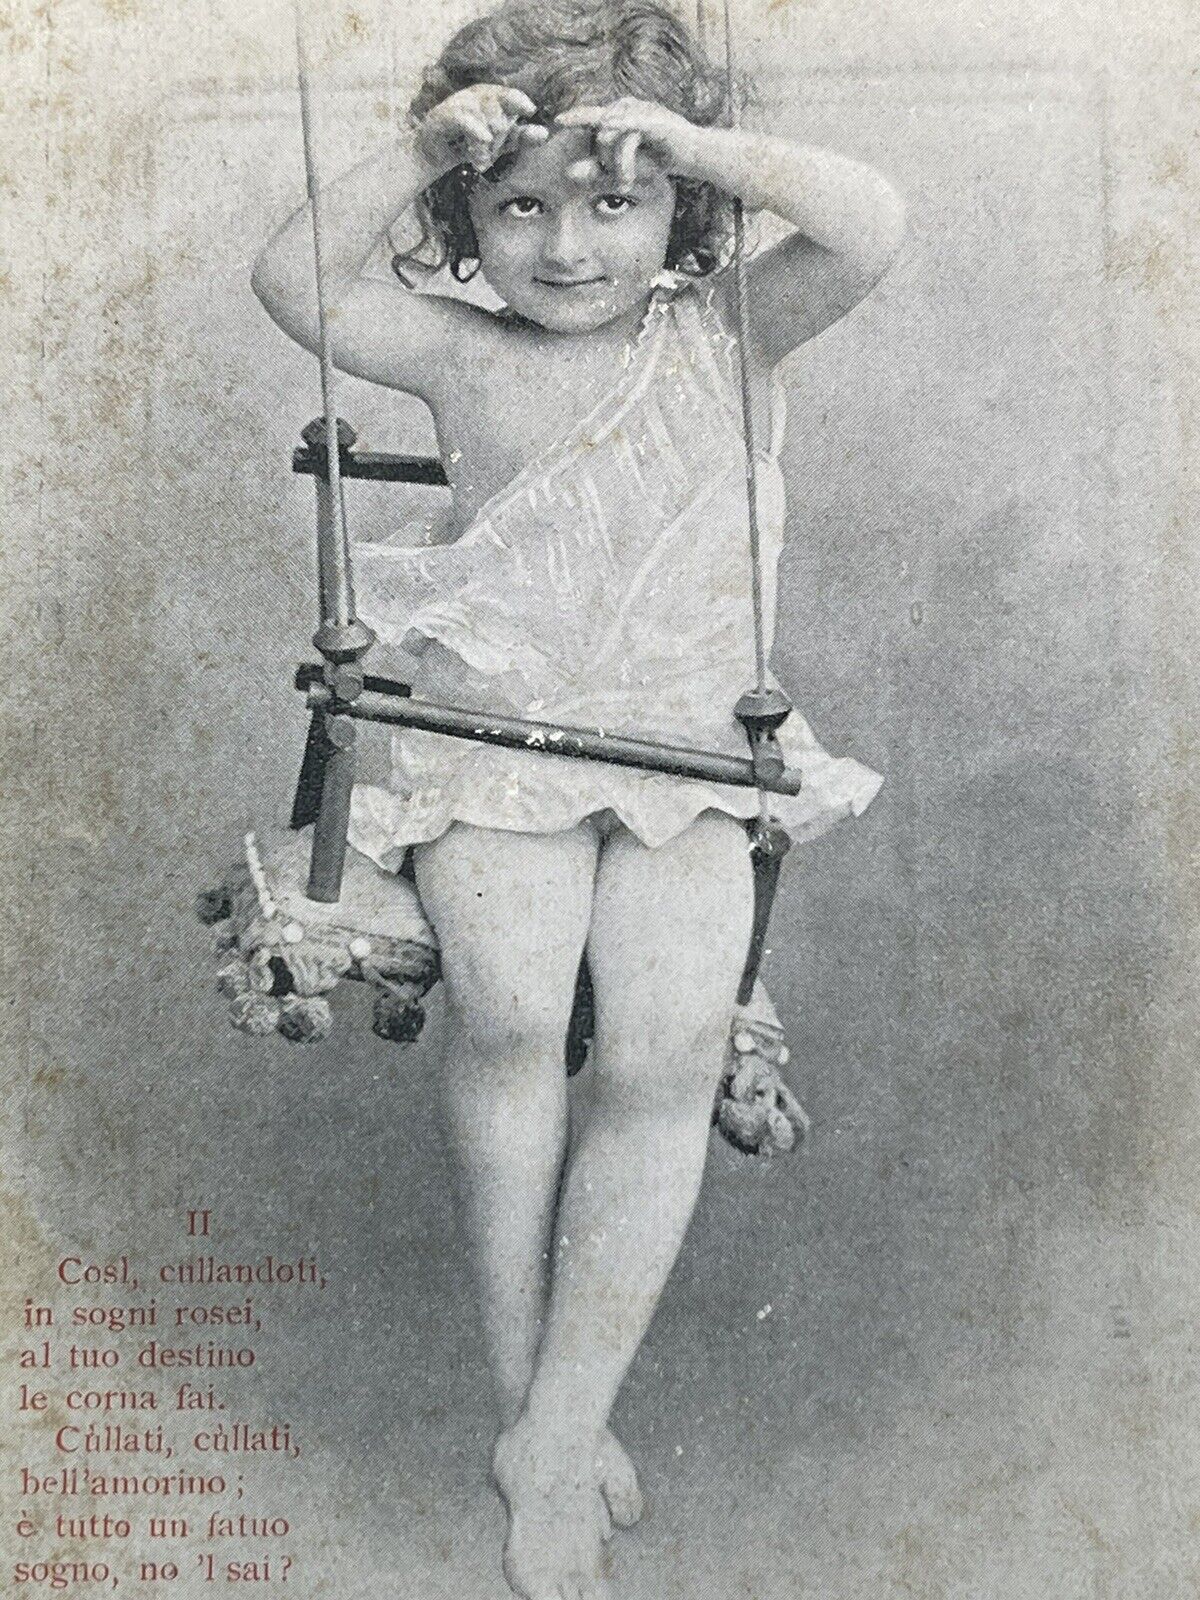 Vintage Postcard 1900s Italian Girl On Swing Tittled “So Flirting With You”